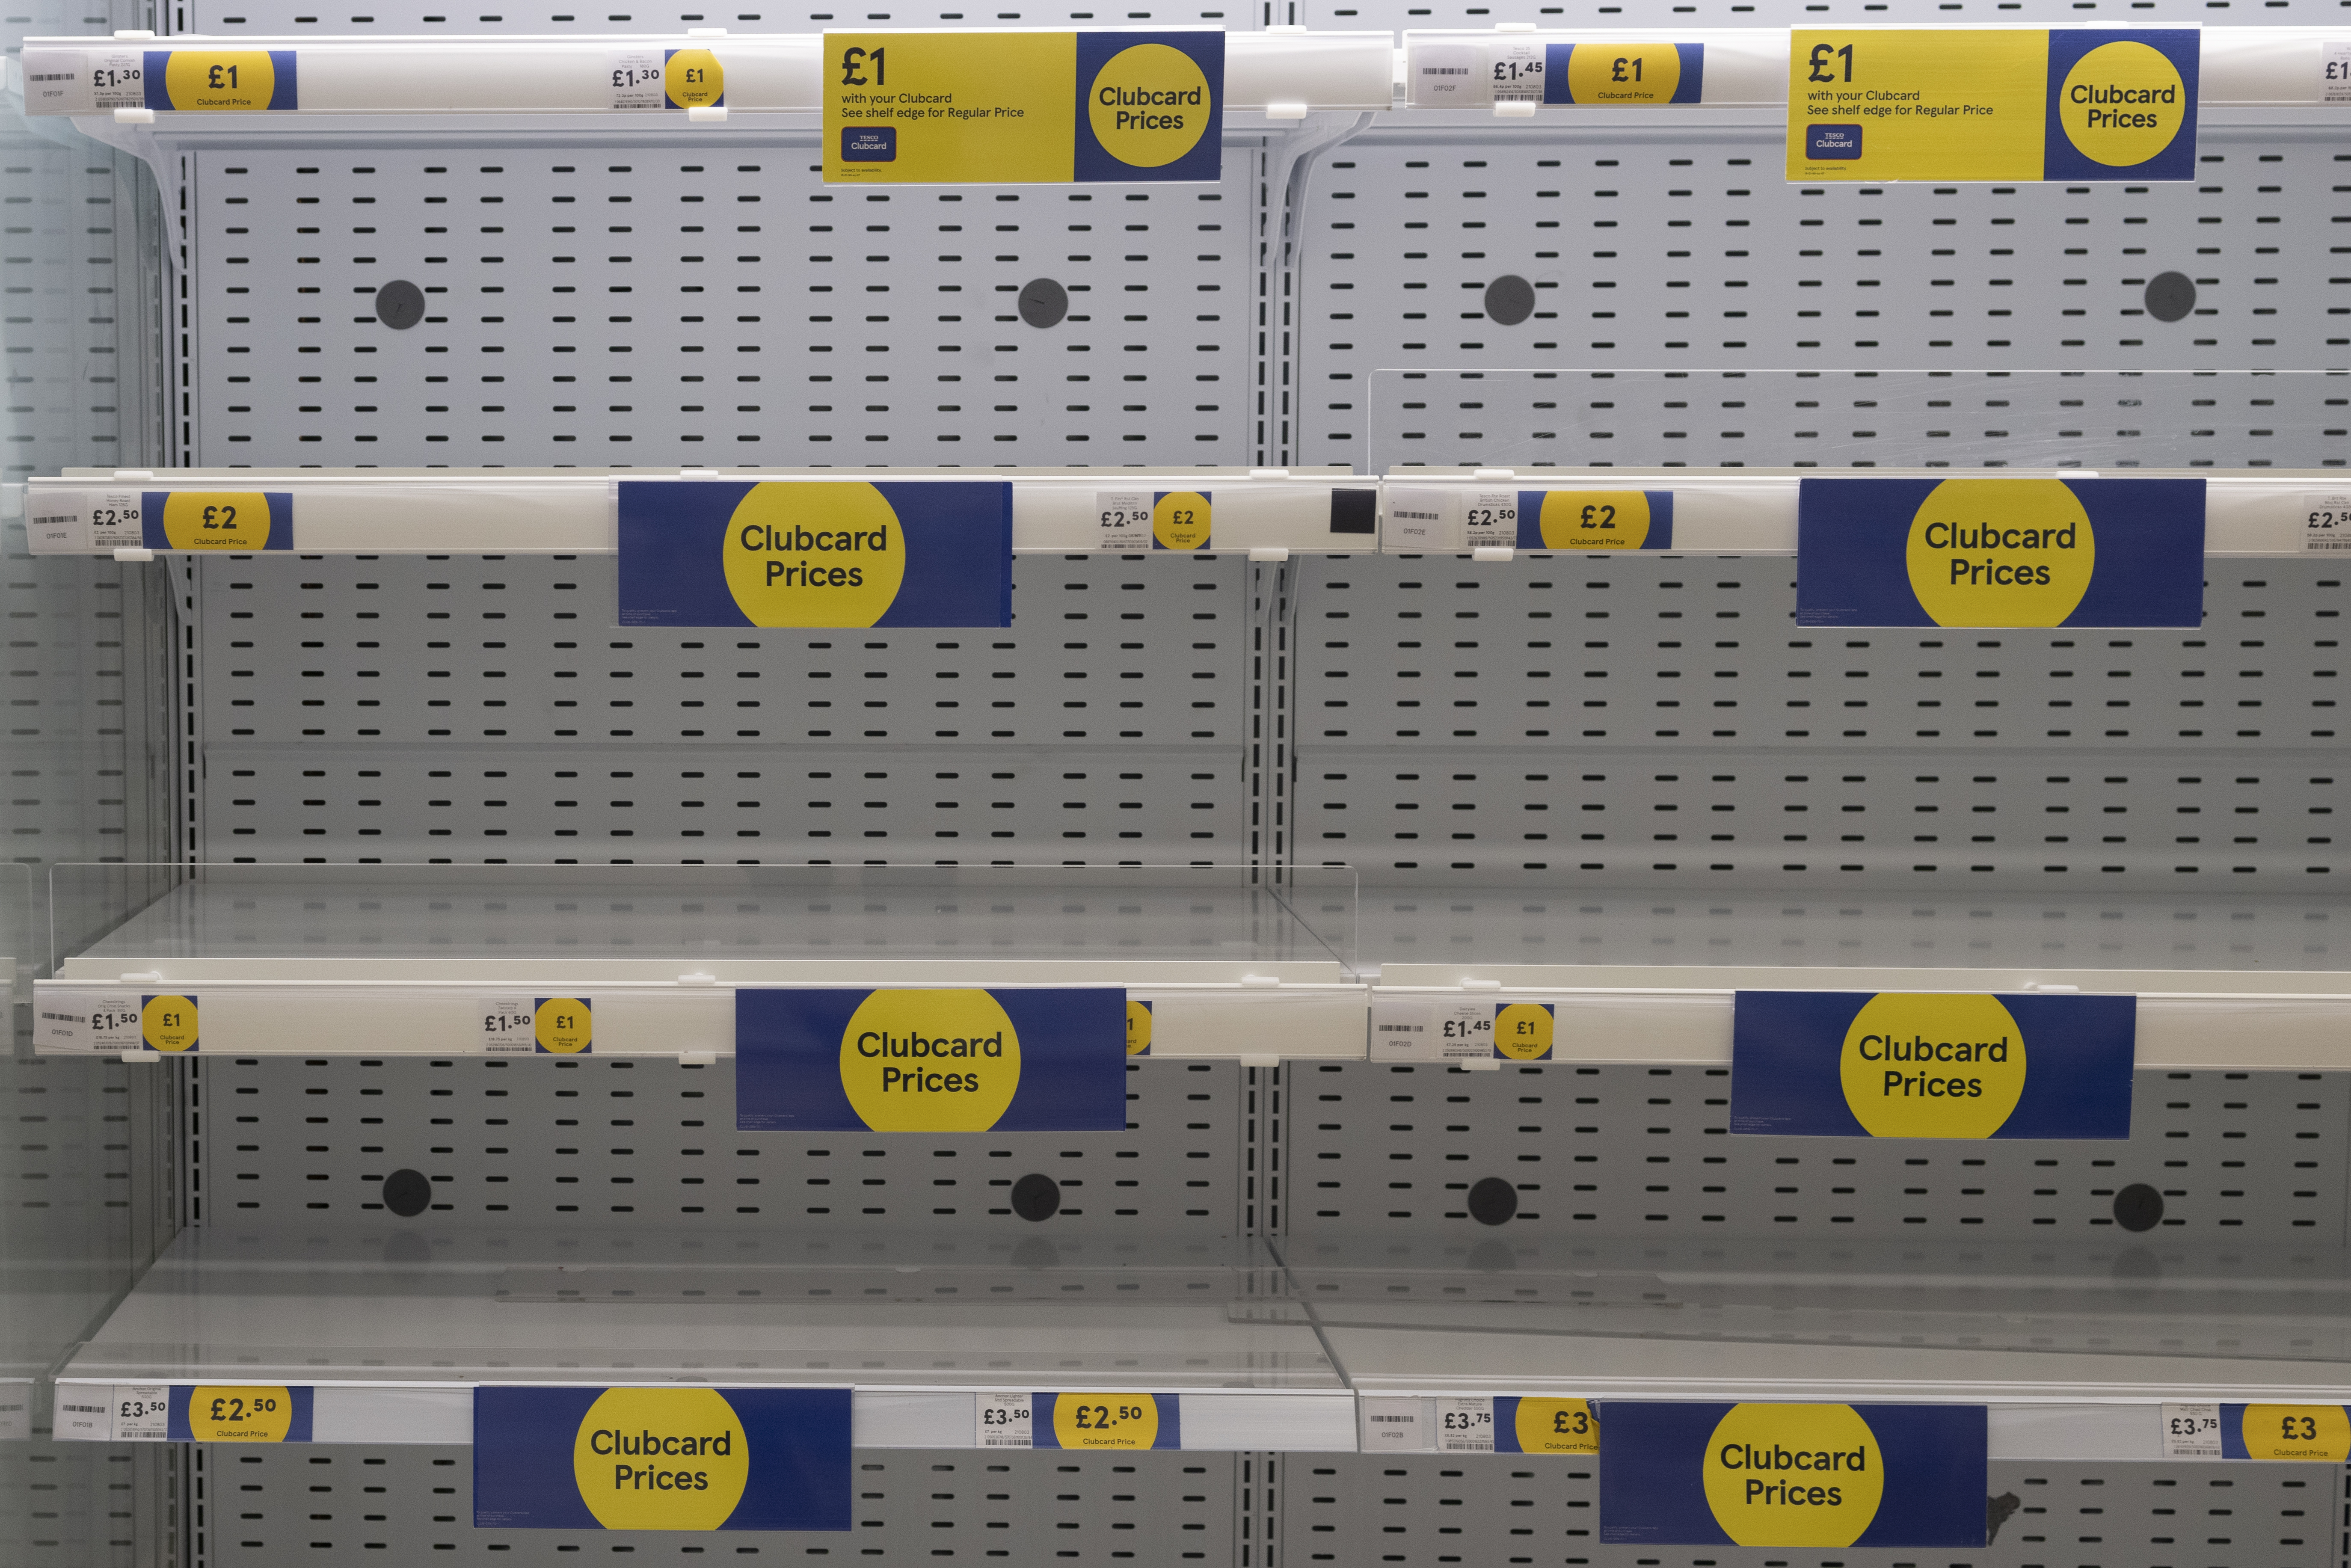 Empty supermarket shelves at Tesco, caused by Brexit and Covid-19 supply chain disruption